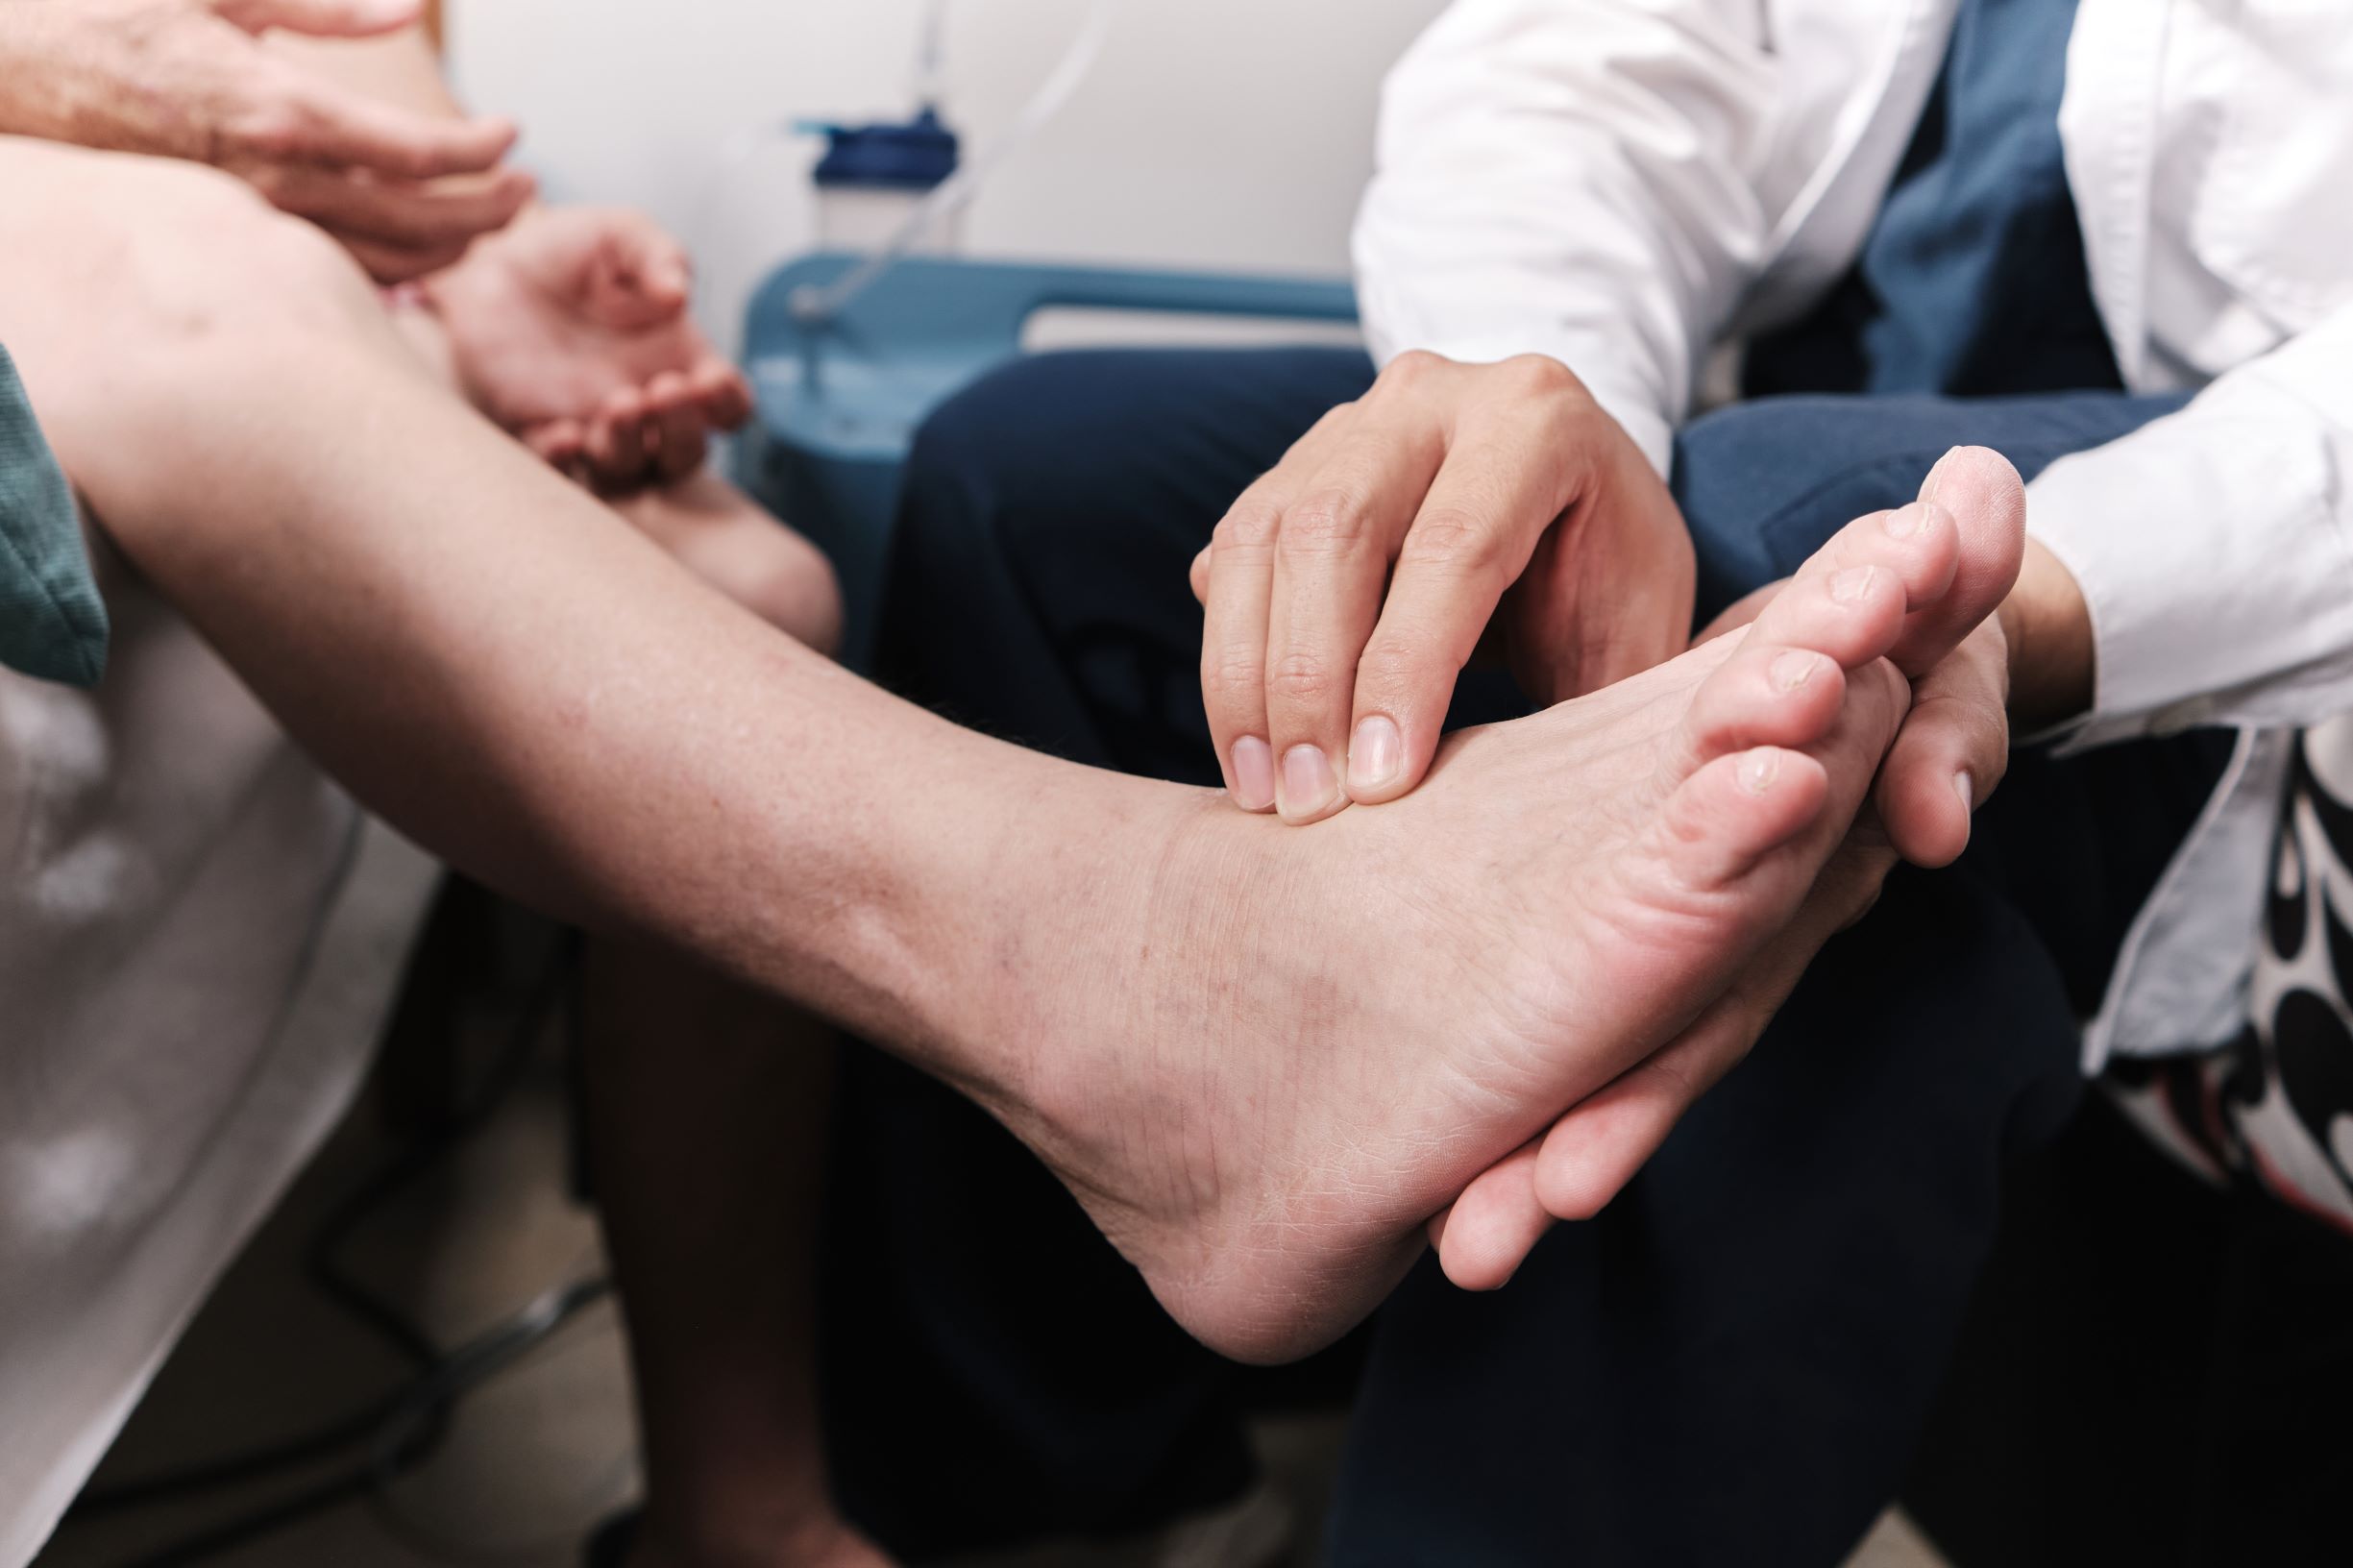 doctor checking the foot of patient